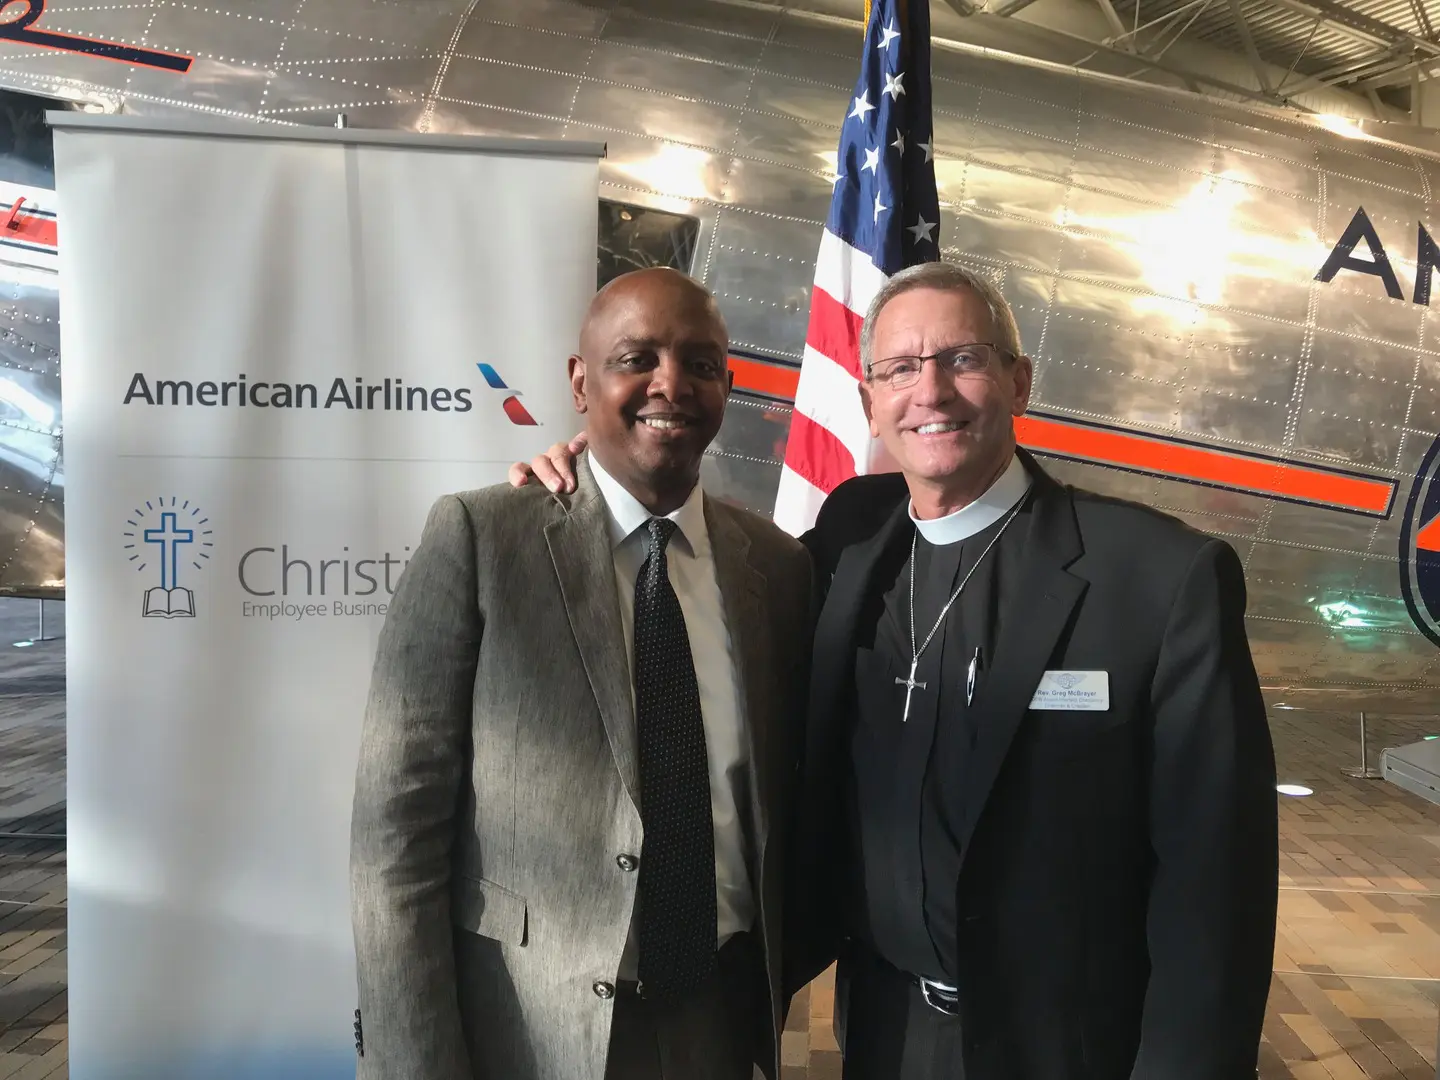 American Airlines tarp with Reverend and person wearing coats